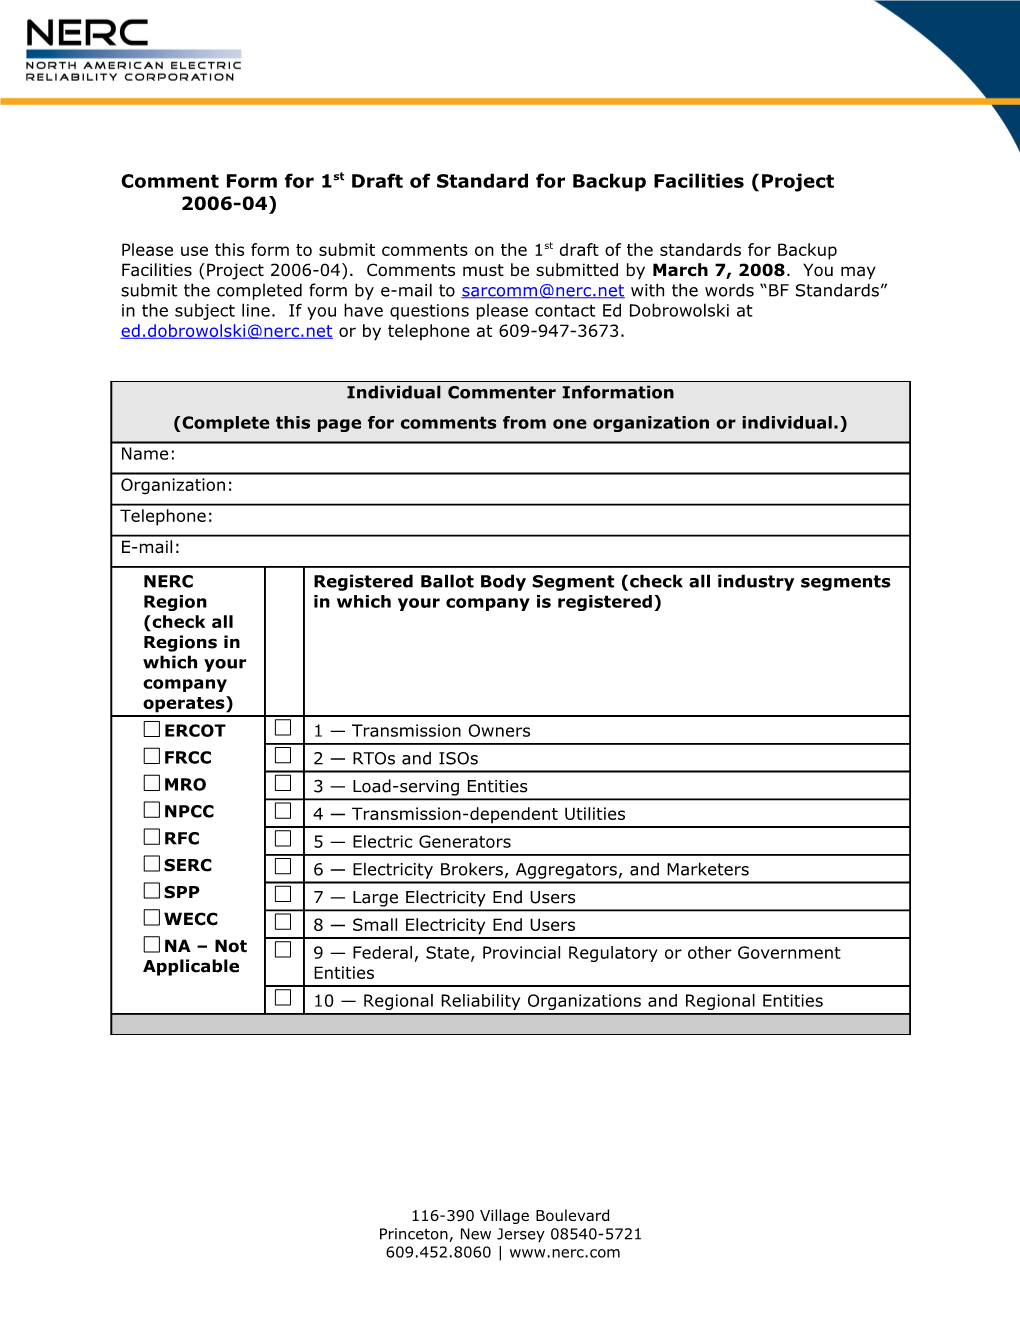 Comment Form for 1St Draft of Standard for Backup Facilities (Project 2006-04)